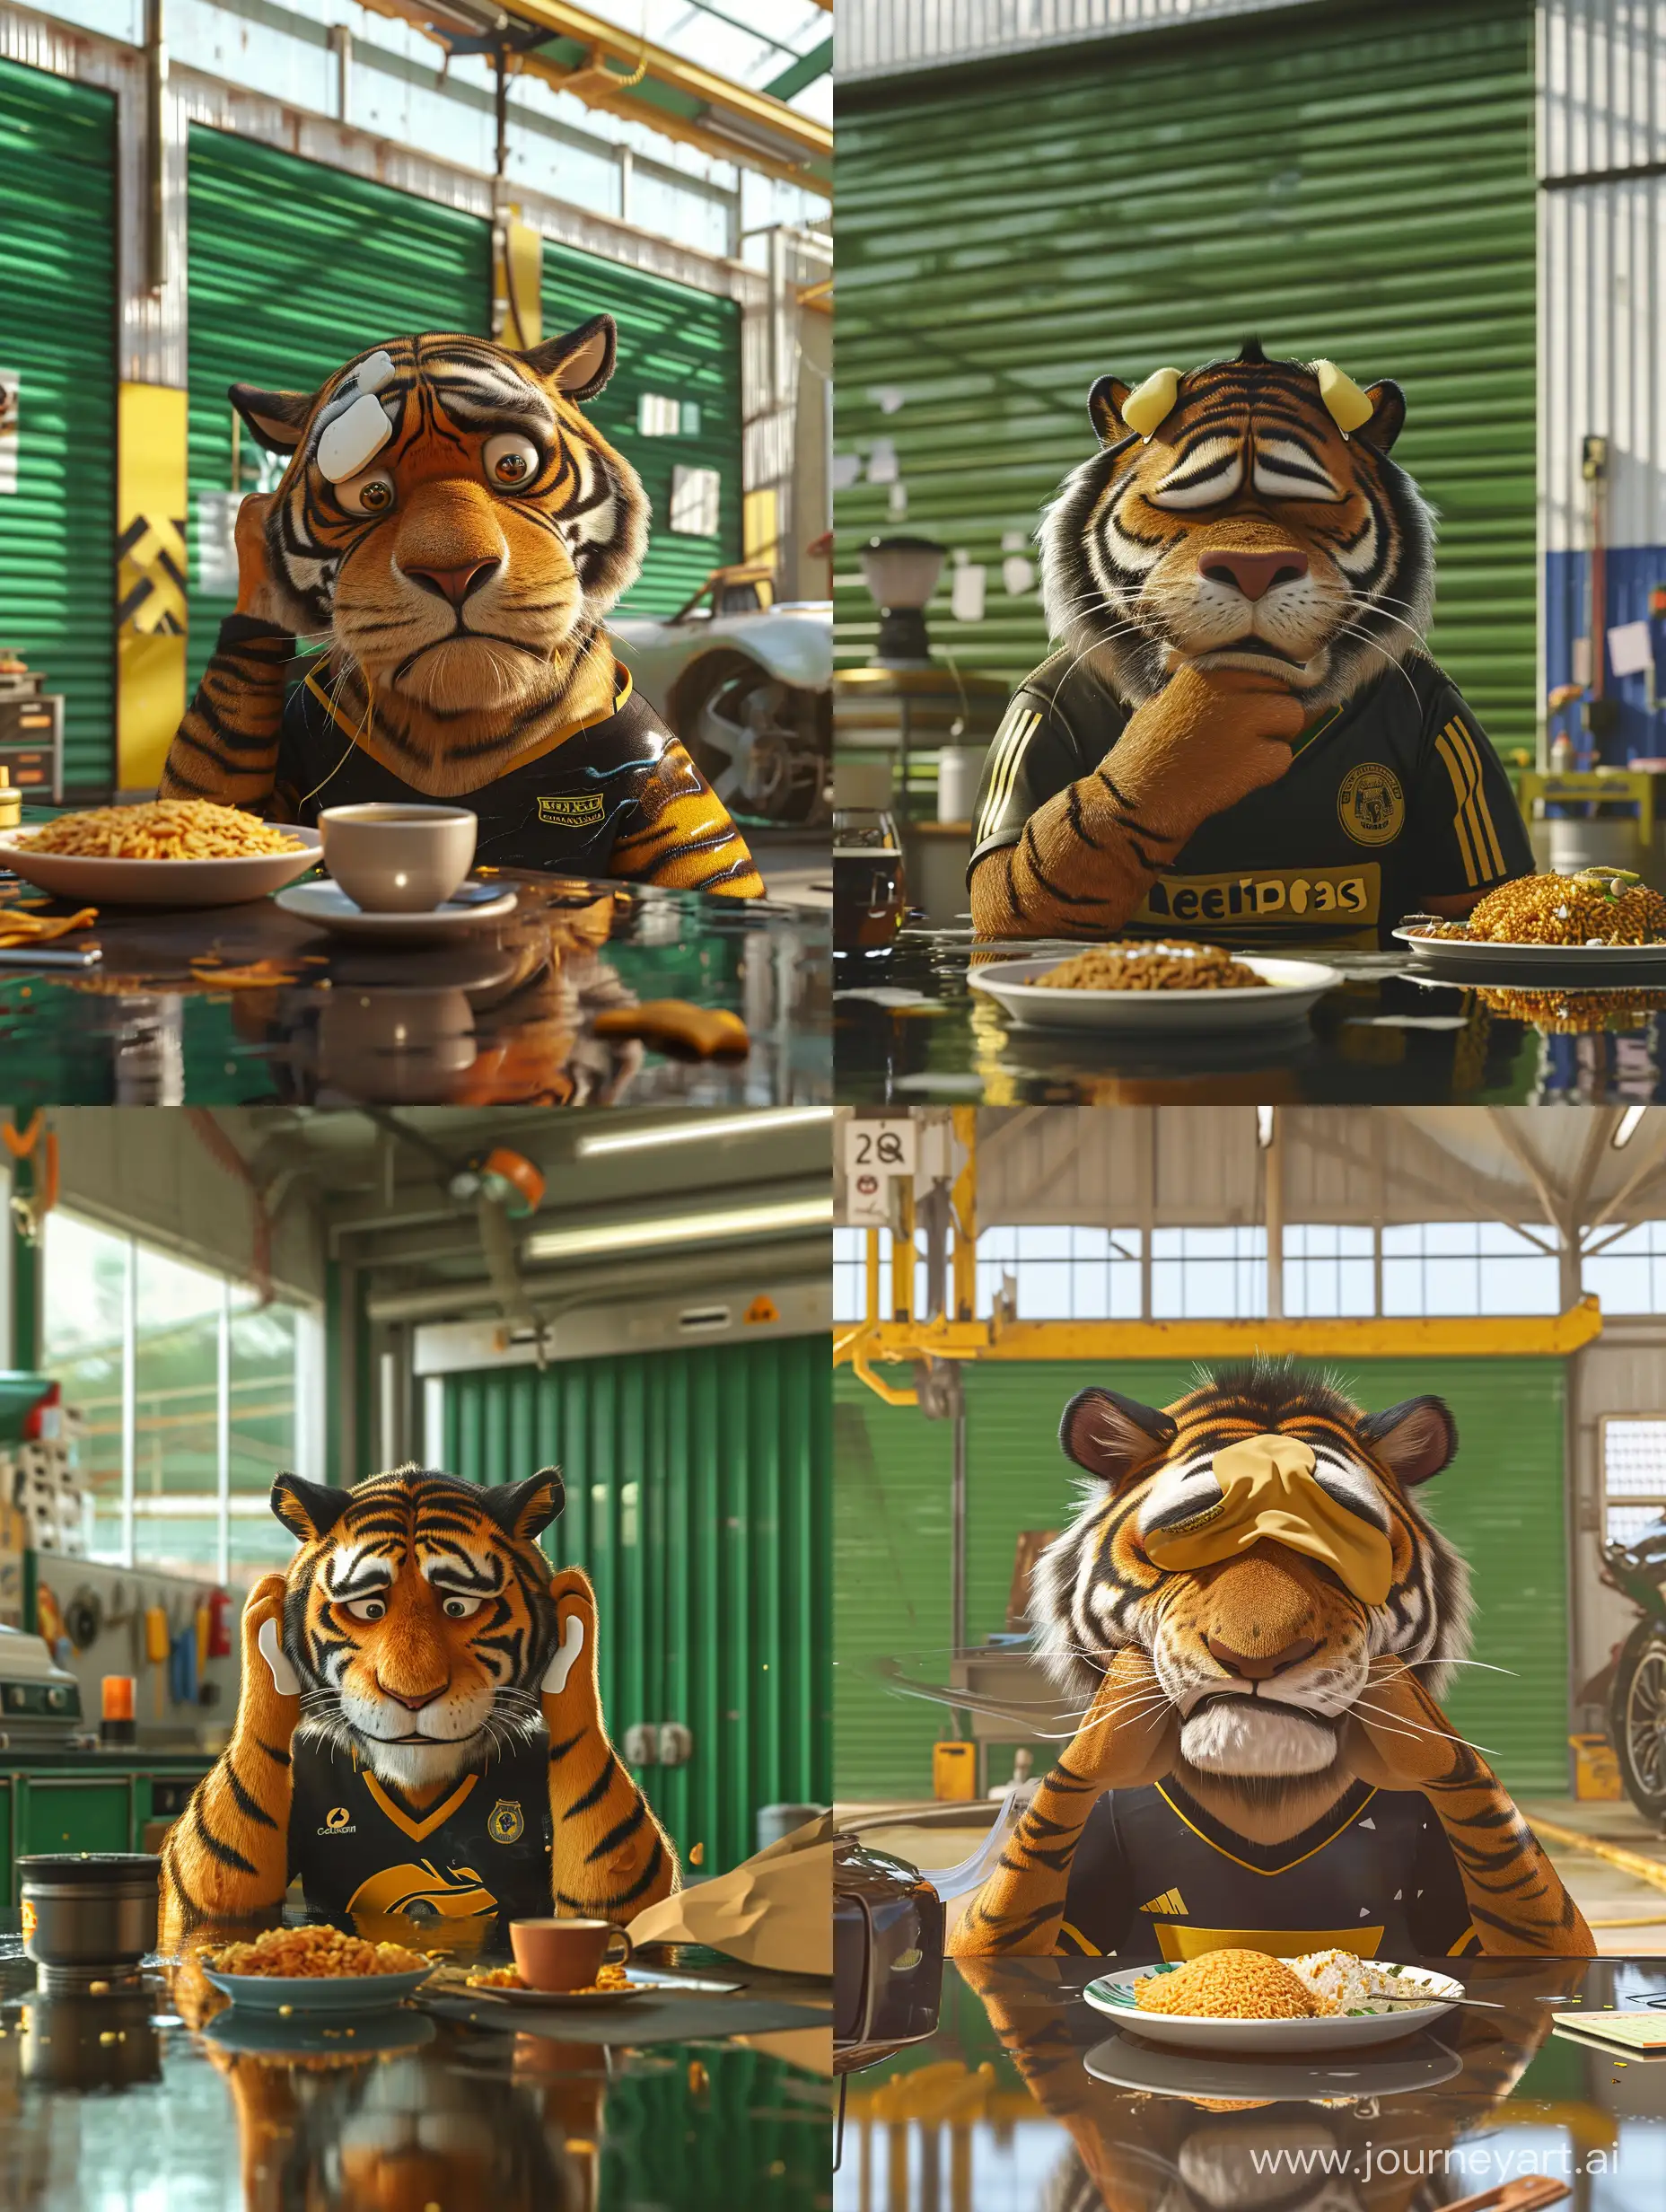 ultra realistic animation cartoon, a tiger is having breakfast. his head was plastered with a headache plaster. there is nasi lemak and coffee on the table. The tiger raised its chin with a sad face. The tiger wears a black and yellow Malaysian football jersey. the background of a closed pastle green, white and gold modern car workshop. there is refraction of morning sunlight. canon eos-id x mark iii dslr --v 6.0